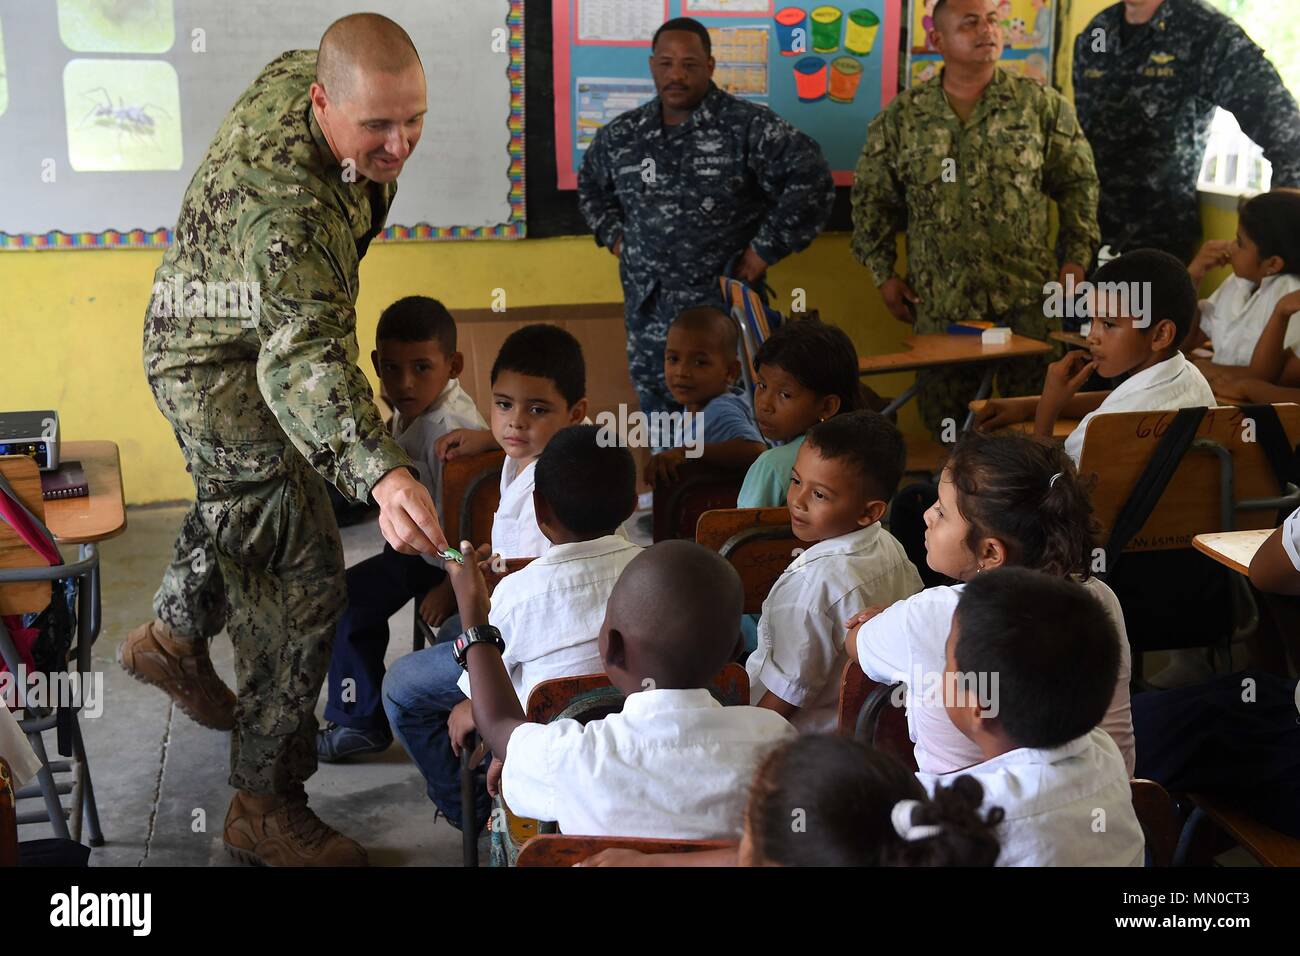 170801-N-BK435-0159 SILIN, Honduras (Aug. 1, 2017) Lt. Cmdr. Ian Sutherland, technical director for the Navy Entomology Center of Excellence, hands a student a toy bug during an entomology class at República de Colombia Elementary School during a Southern Partnership Station 17 community relations project (COMREL). SPS-EPF 17 is a U.S. Navy deployment, executed by U.S. Naval Forces Southern Command/U.S. 4th Fleet, focused on subject matter expert exchanges with partner nation militaries and security forces in Central and South America. (U.S. Navy photo by Mass Communication Specialist 1st Clas Stock Photo